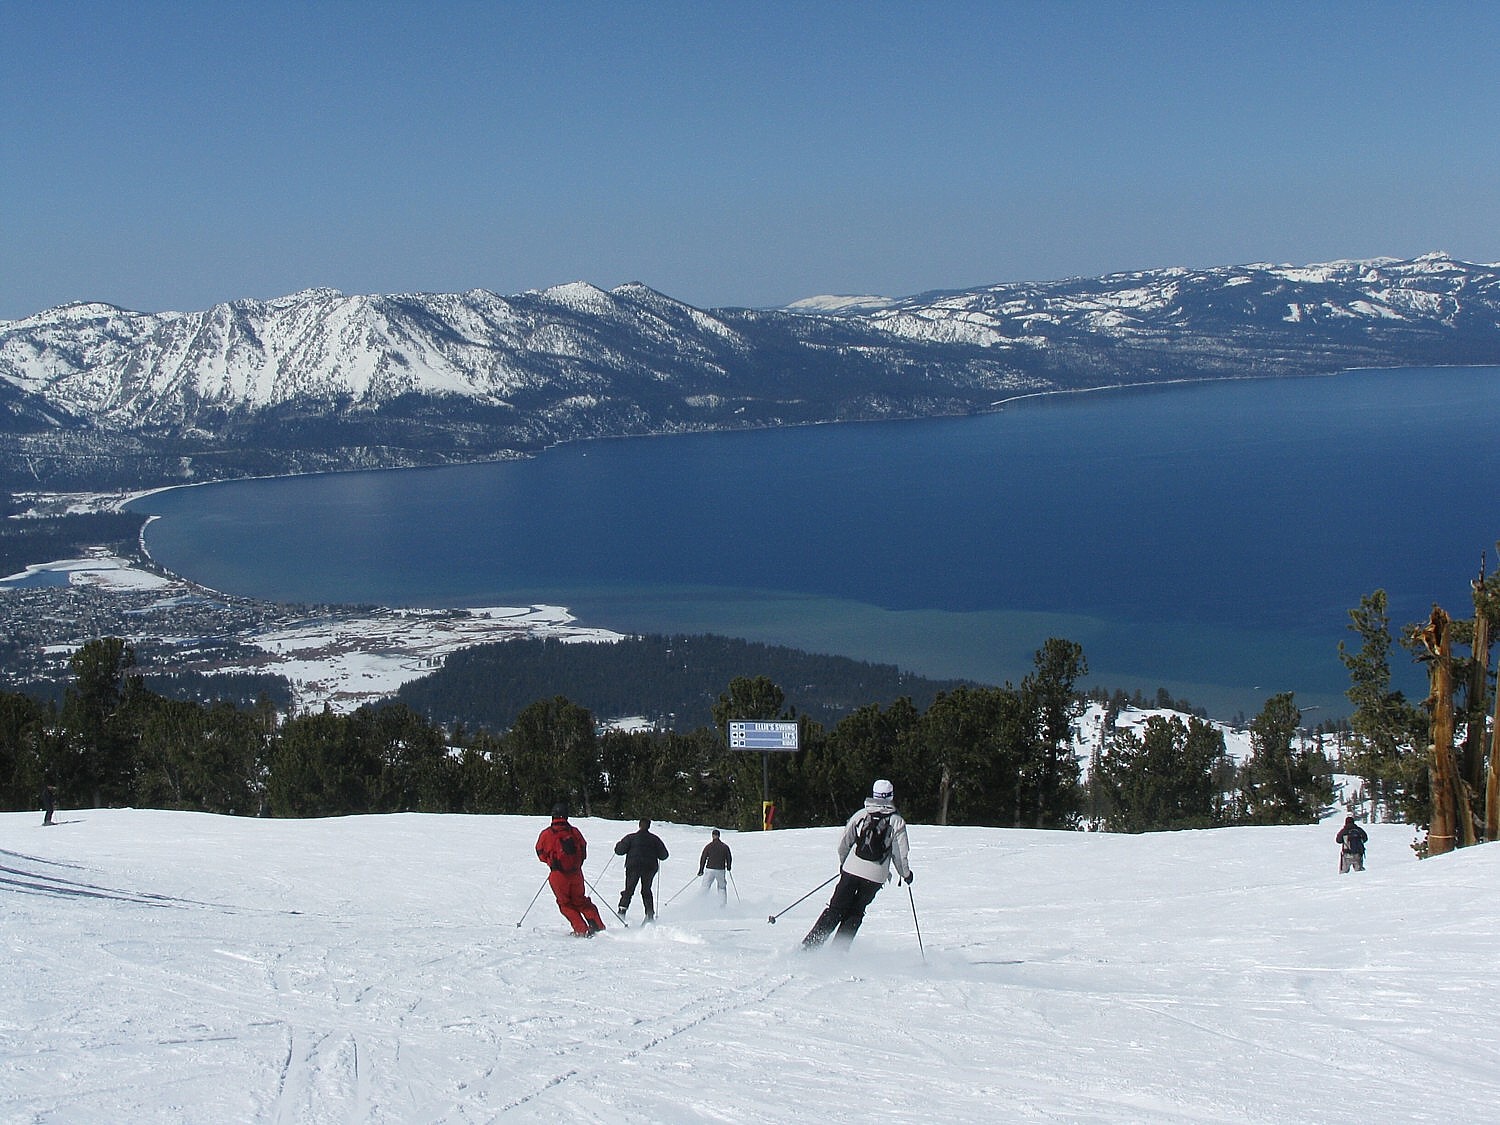 Heavenly Mountain at Lake Tahoe is part of Vail Resorts’ Epic Pass which also gives access to resorts in Australia, France, Italy, Austria and Switzerland © 2016 Karen Rubin/goingplacesfarandnear.com